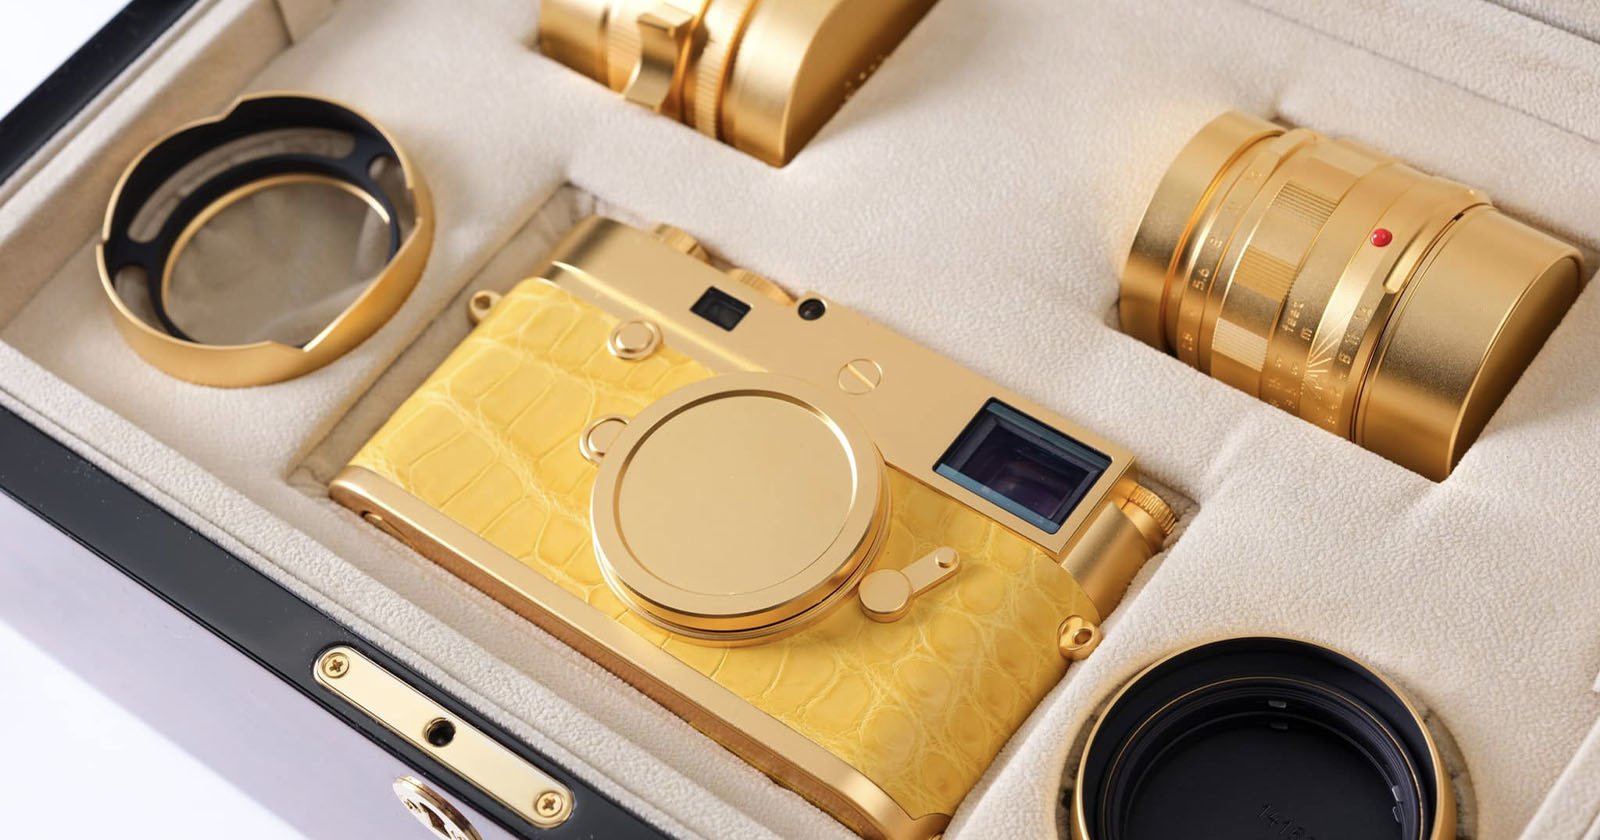 Limited Edition Gold Leica is Being Released in Honor of the Thai King